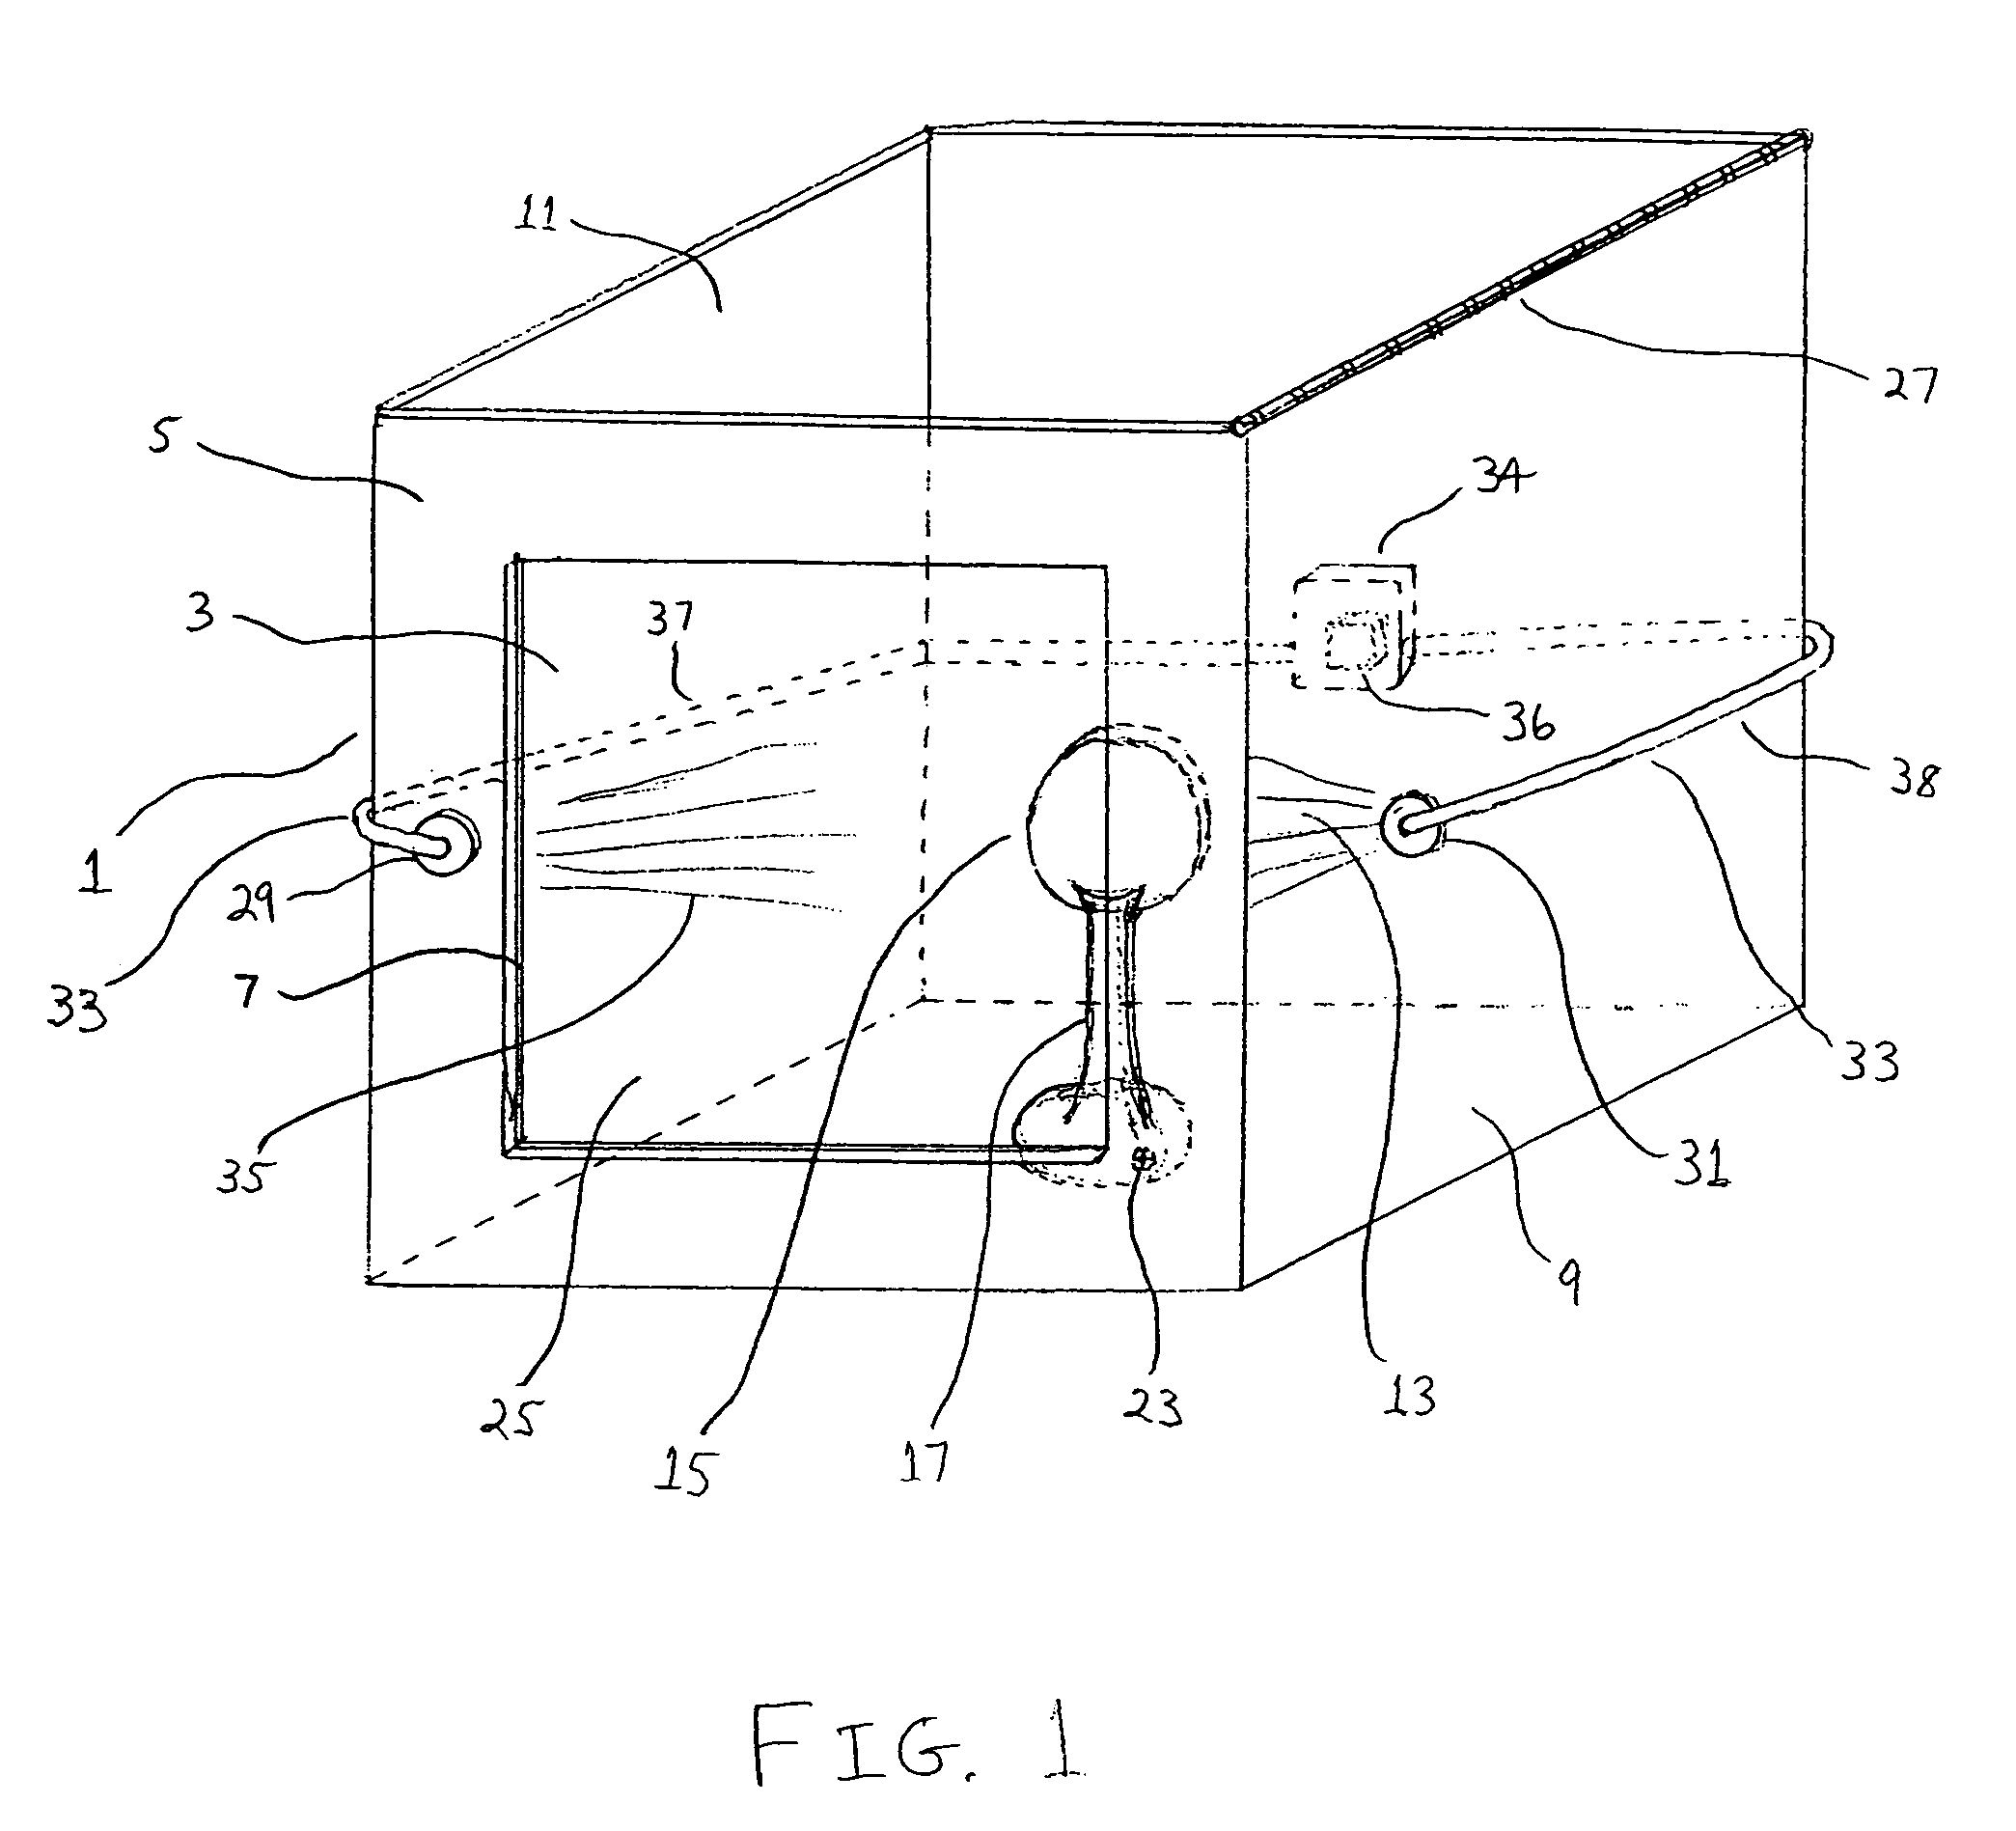 Method and apparatus for object viewing, observation, inspection, identification, and verification